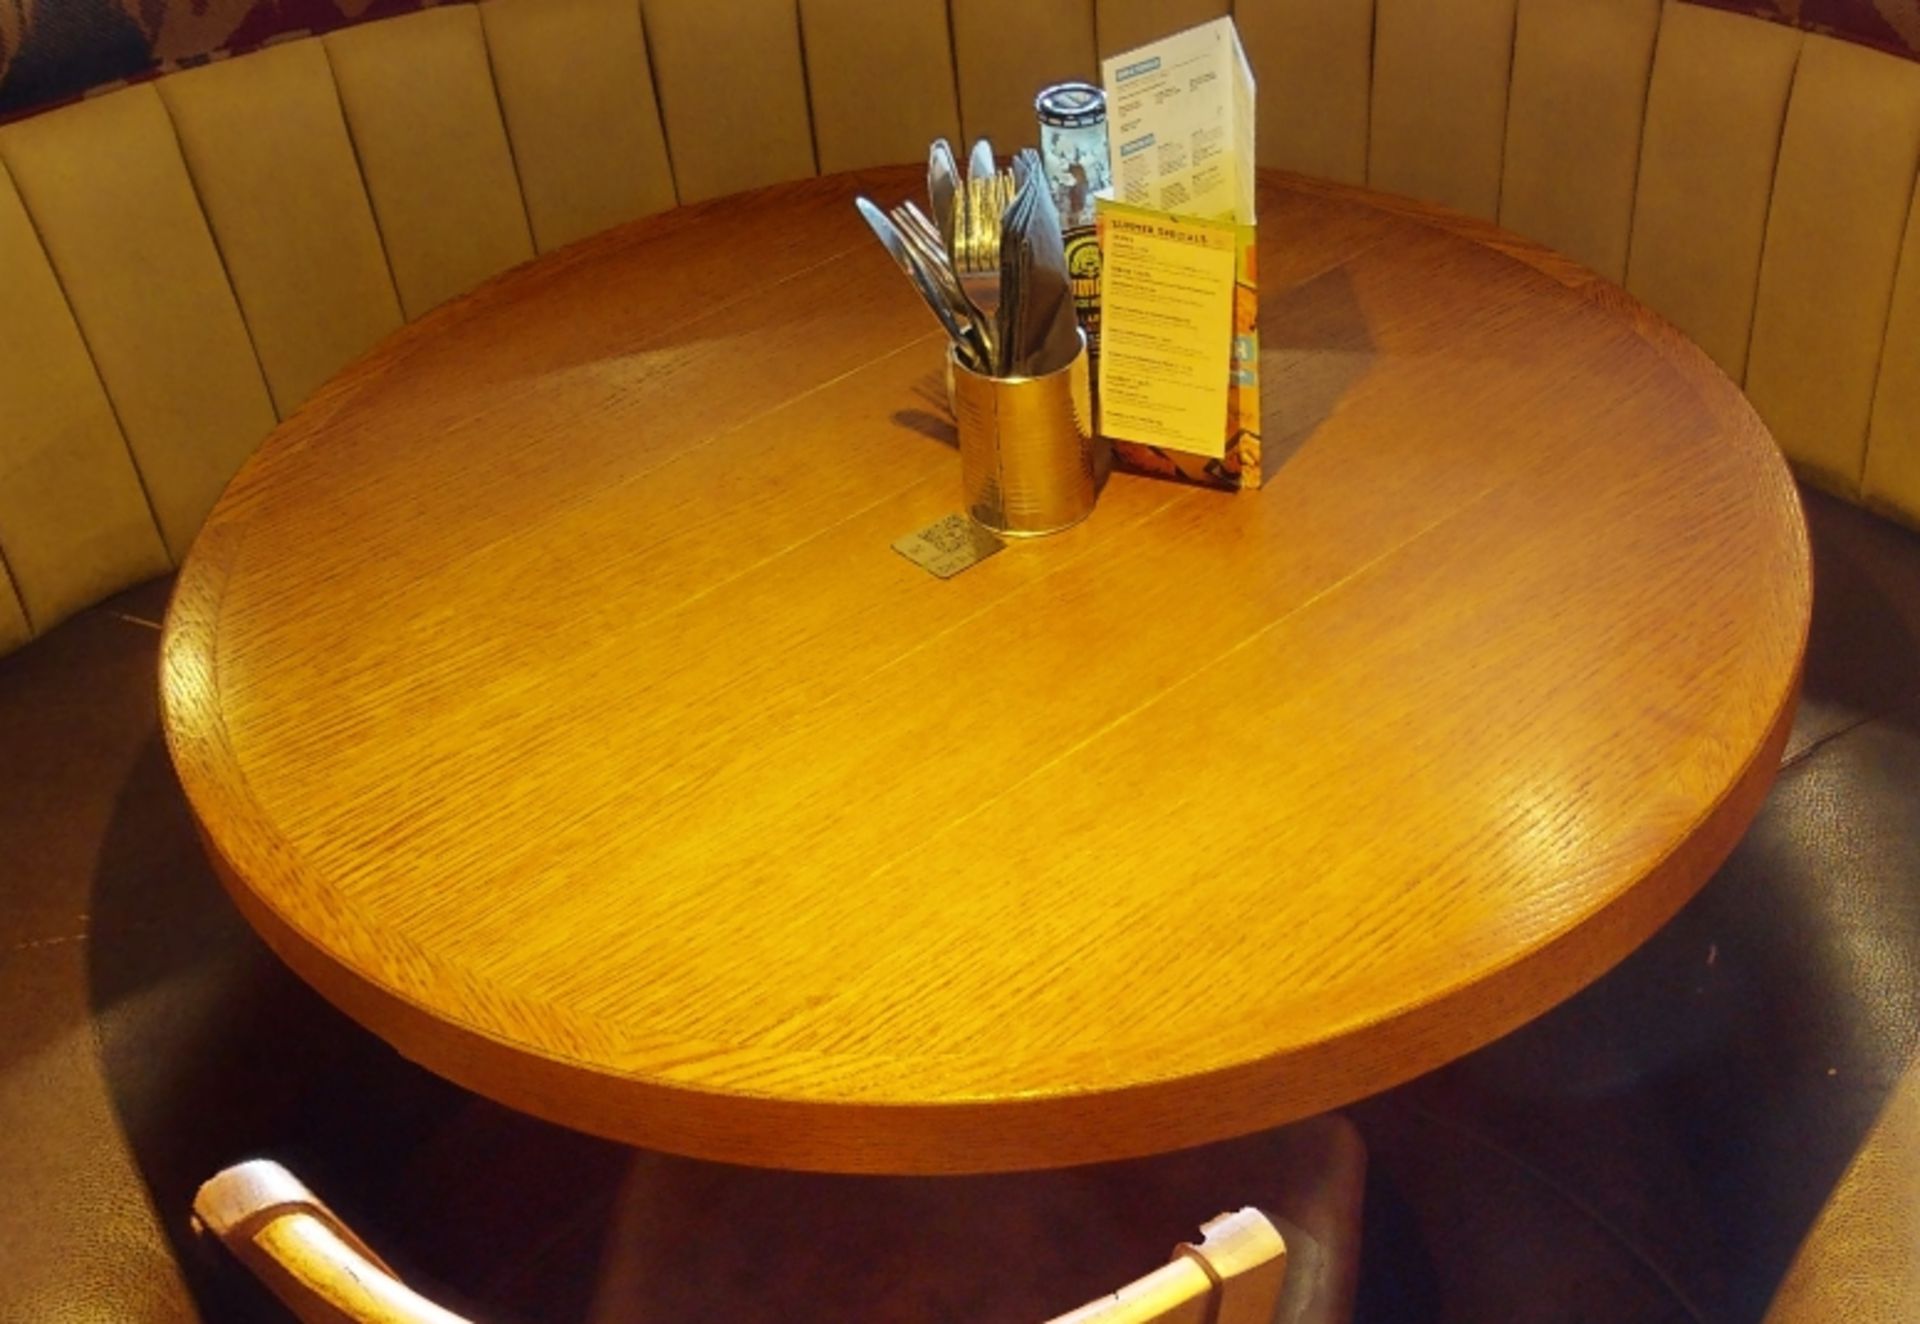 1 x Large Circular Restaurant Dining Table With Cast Iron Base and Wood Panelled Design Top With - Image 3 of 5